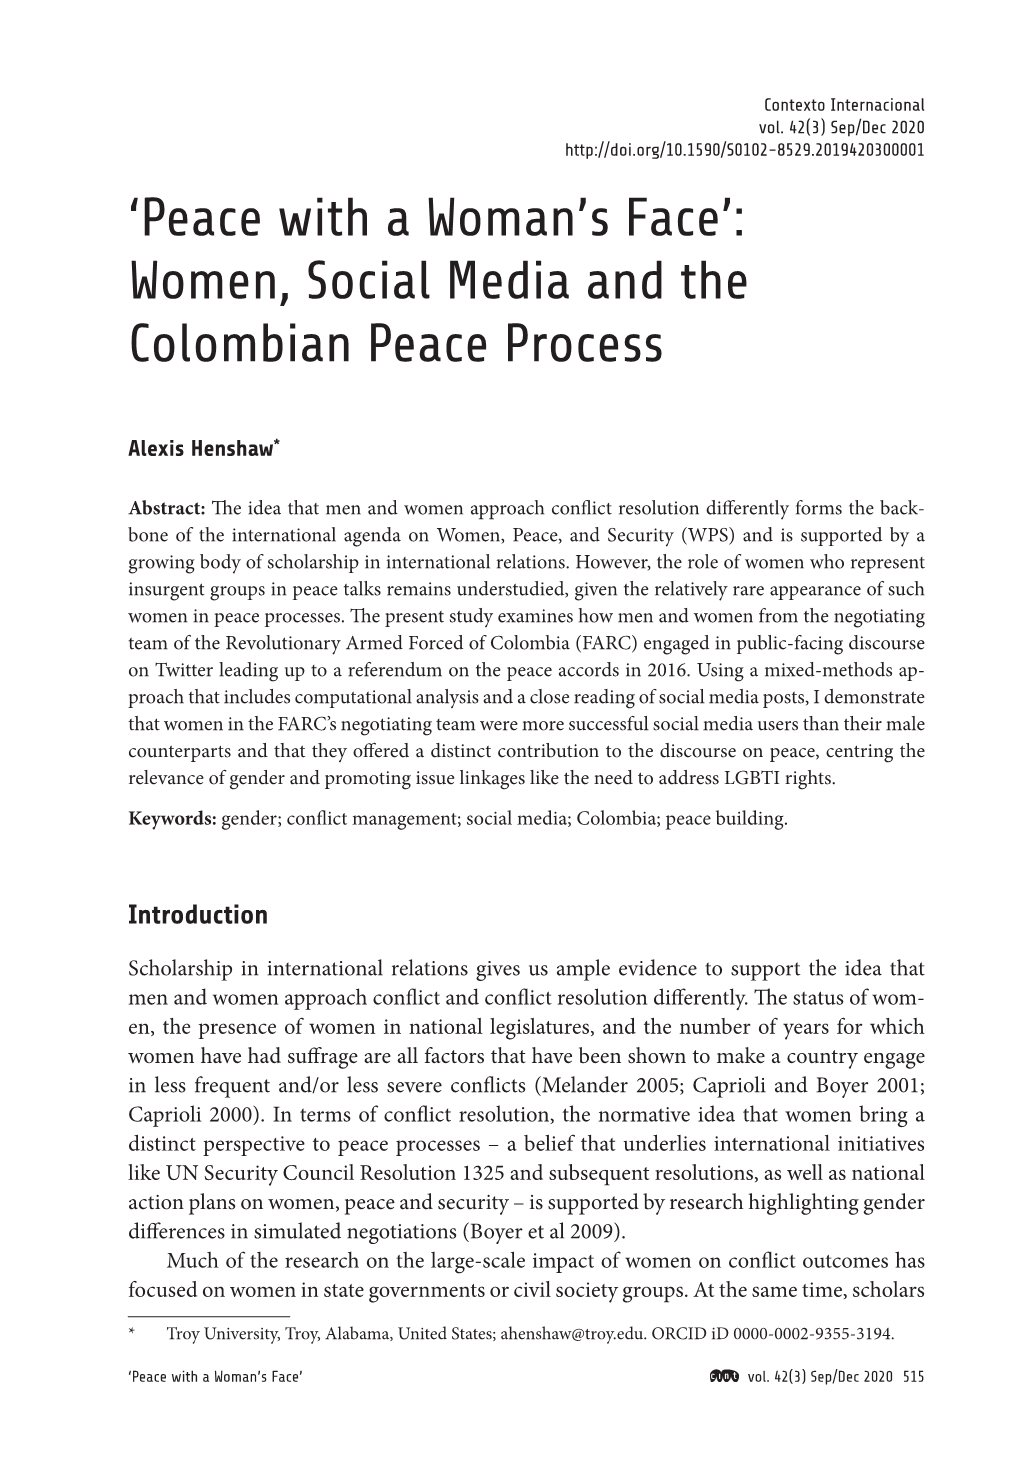 Women, Social Media and the Colombian Peace Process